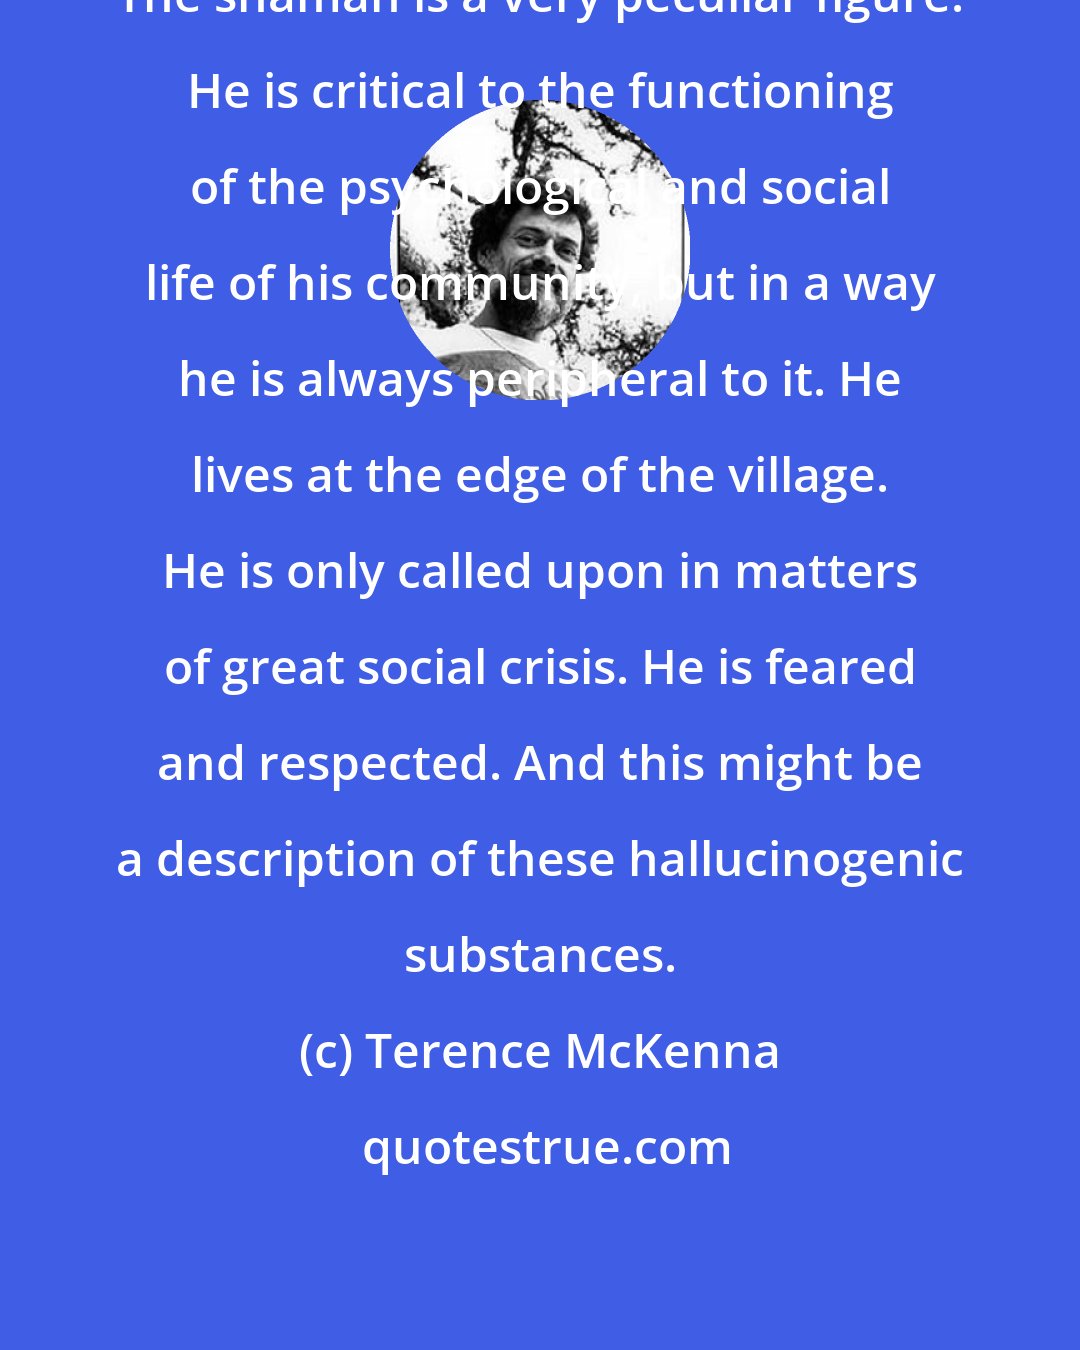 Terence McKenna: The shaman is a very peculiar figure. He is critical to the functioning of the psychological and social life of his community, but in a way he is always peripheral to it. He lives at the edge of the village. He is only called upon in matters of great social crisis. He is feared and respected. And this might be a description of these hallucinogenic substances.